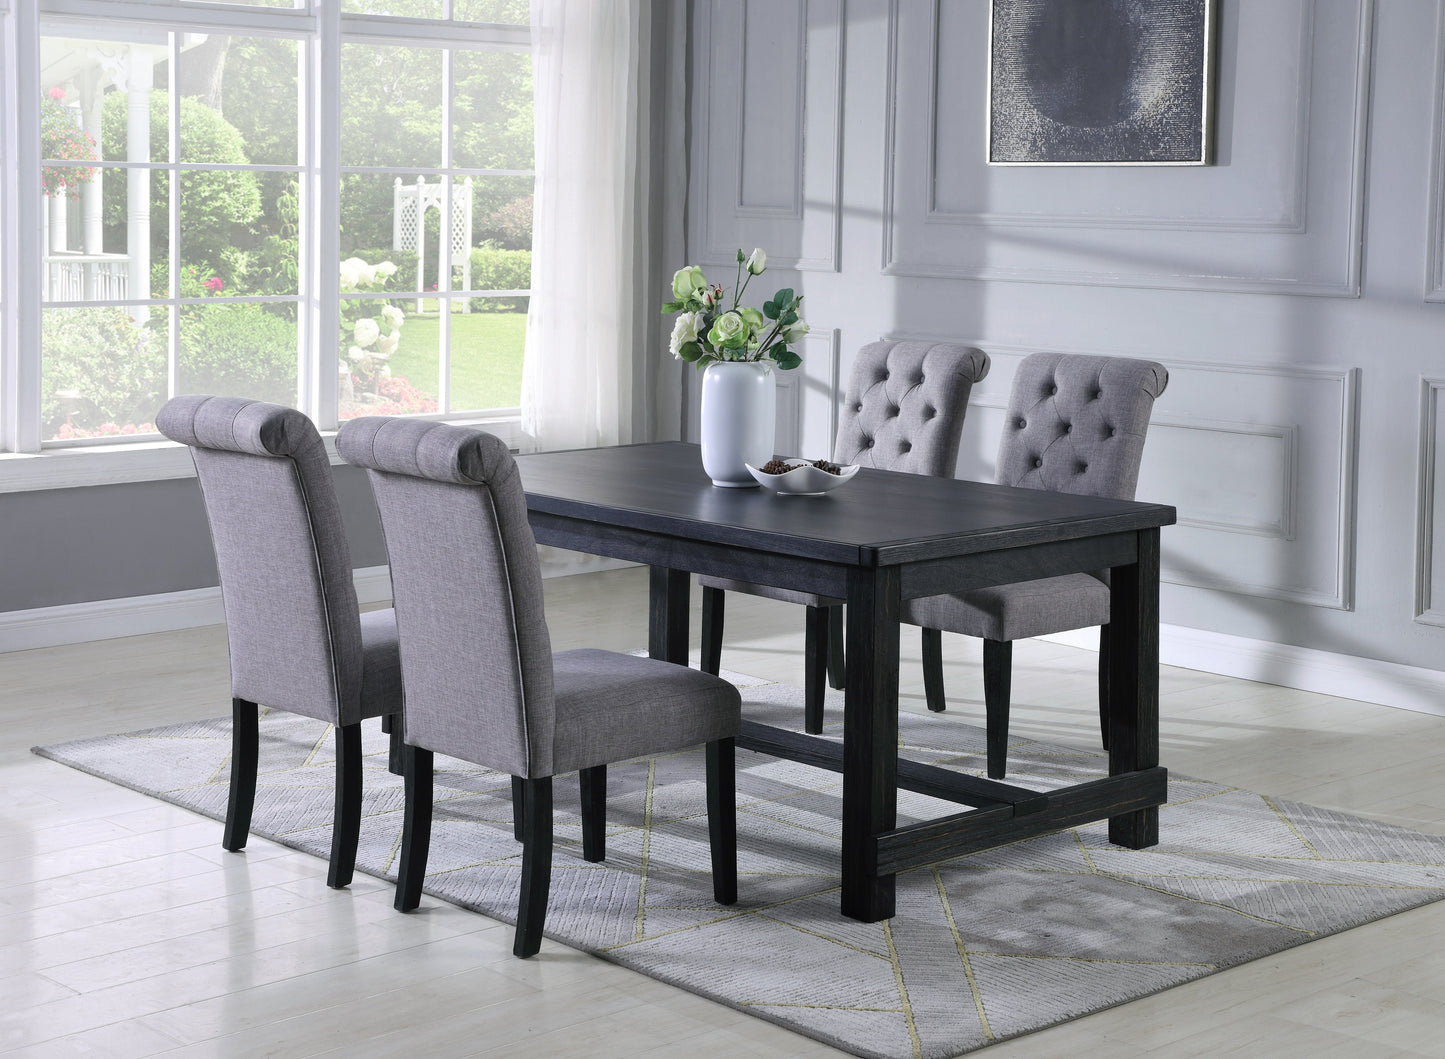 Leviton Antique Black Finished Wood Dining Set, Table with Four Chair, Gray